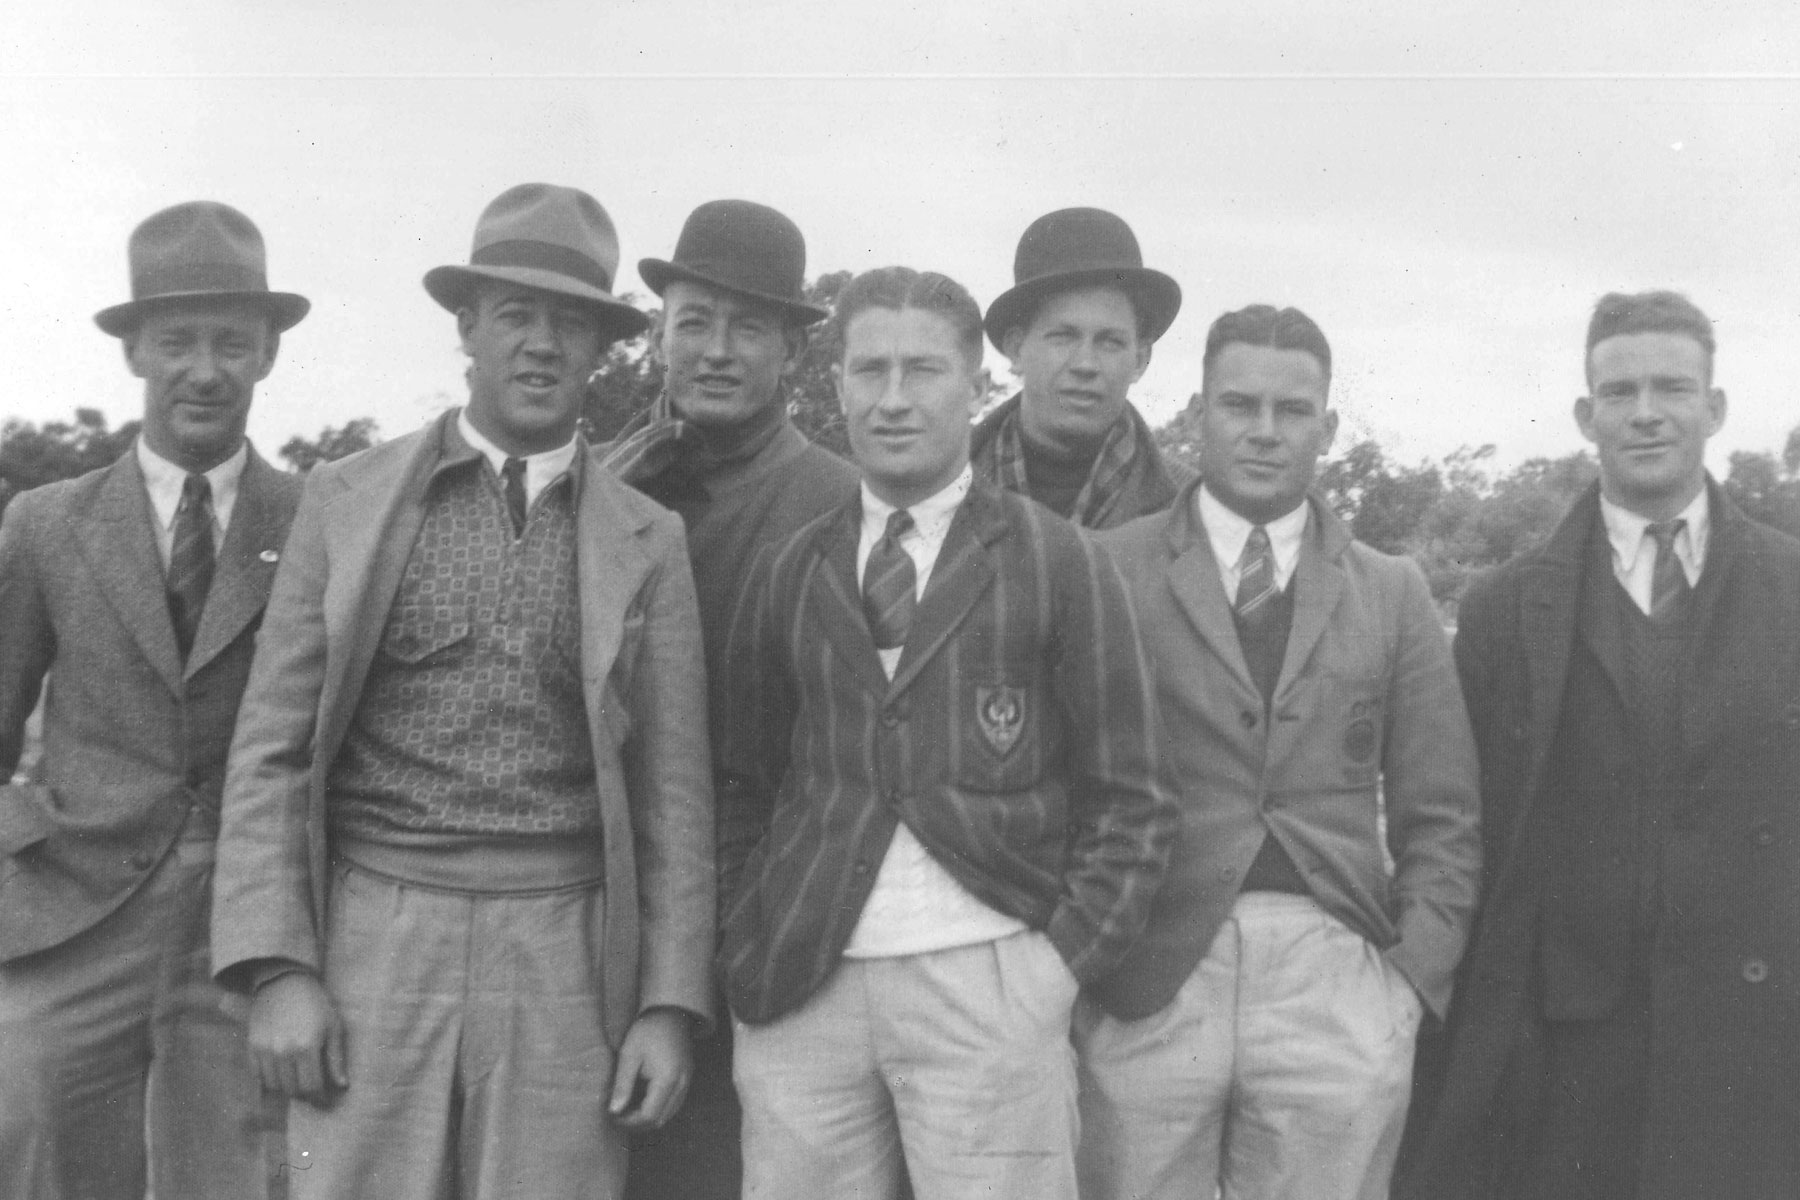 Claremont Football Club History – Strong & Bold